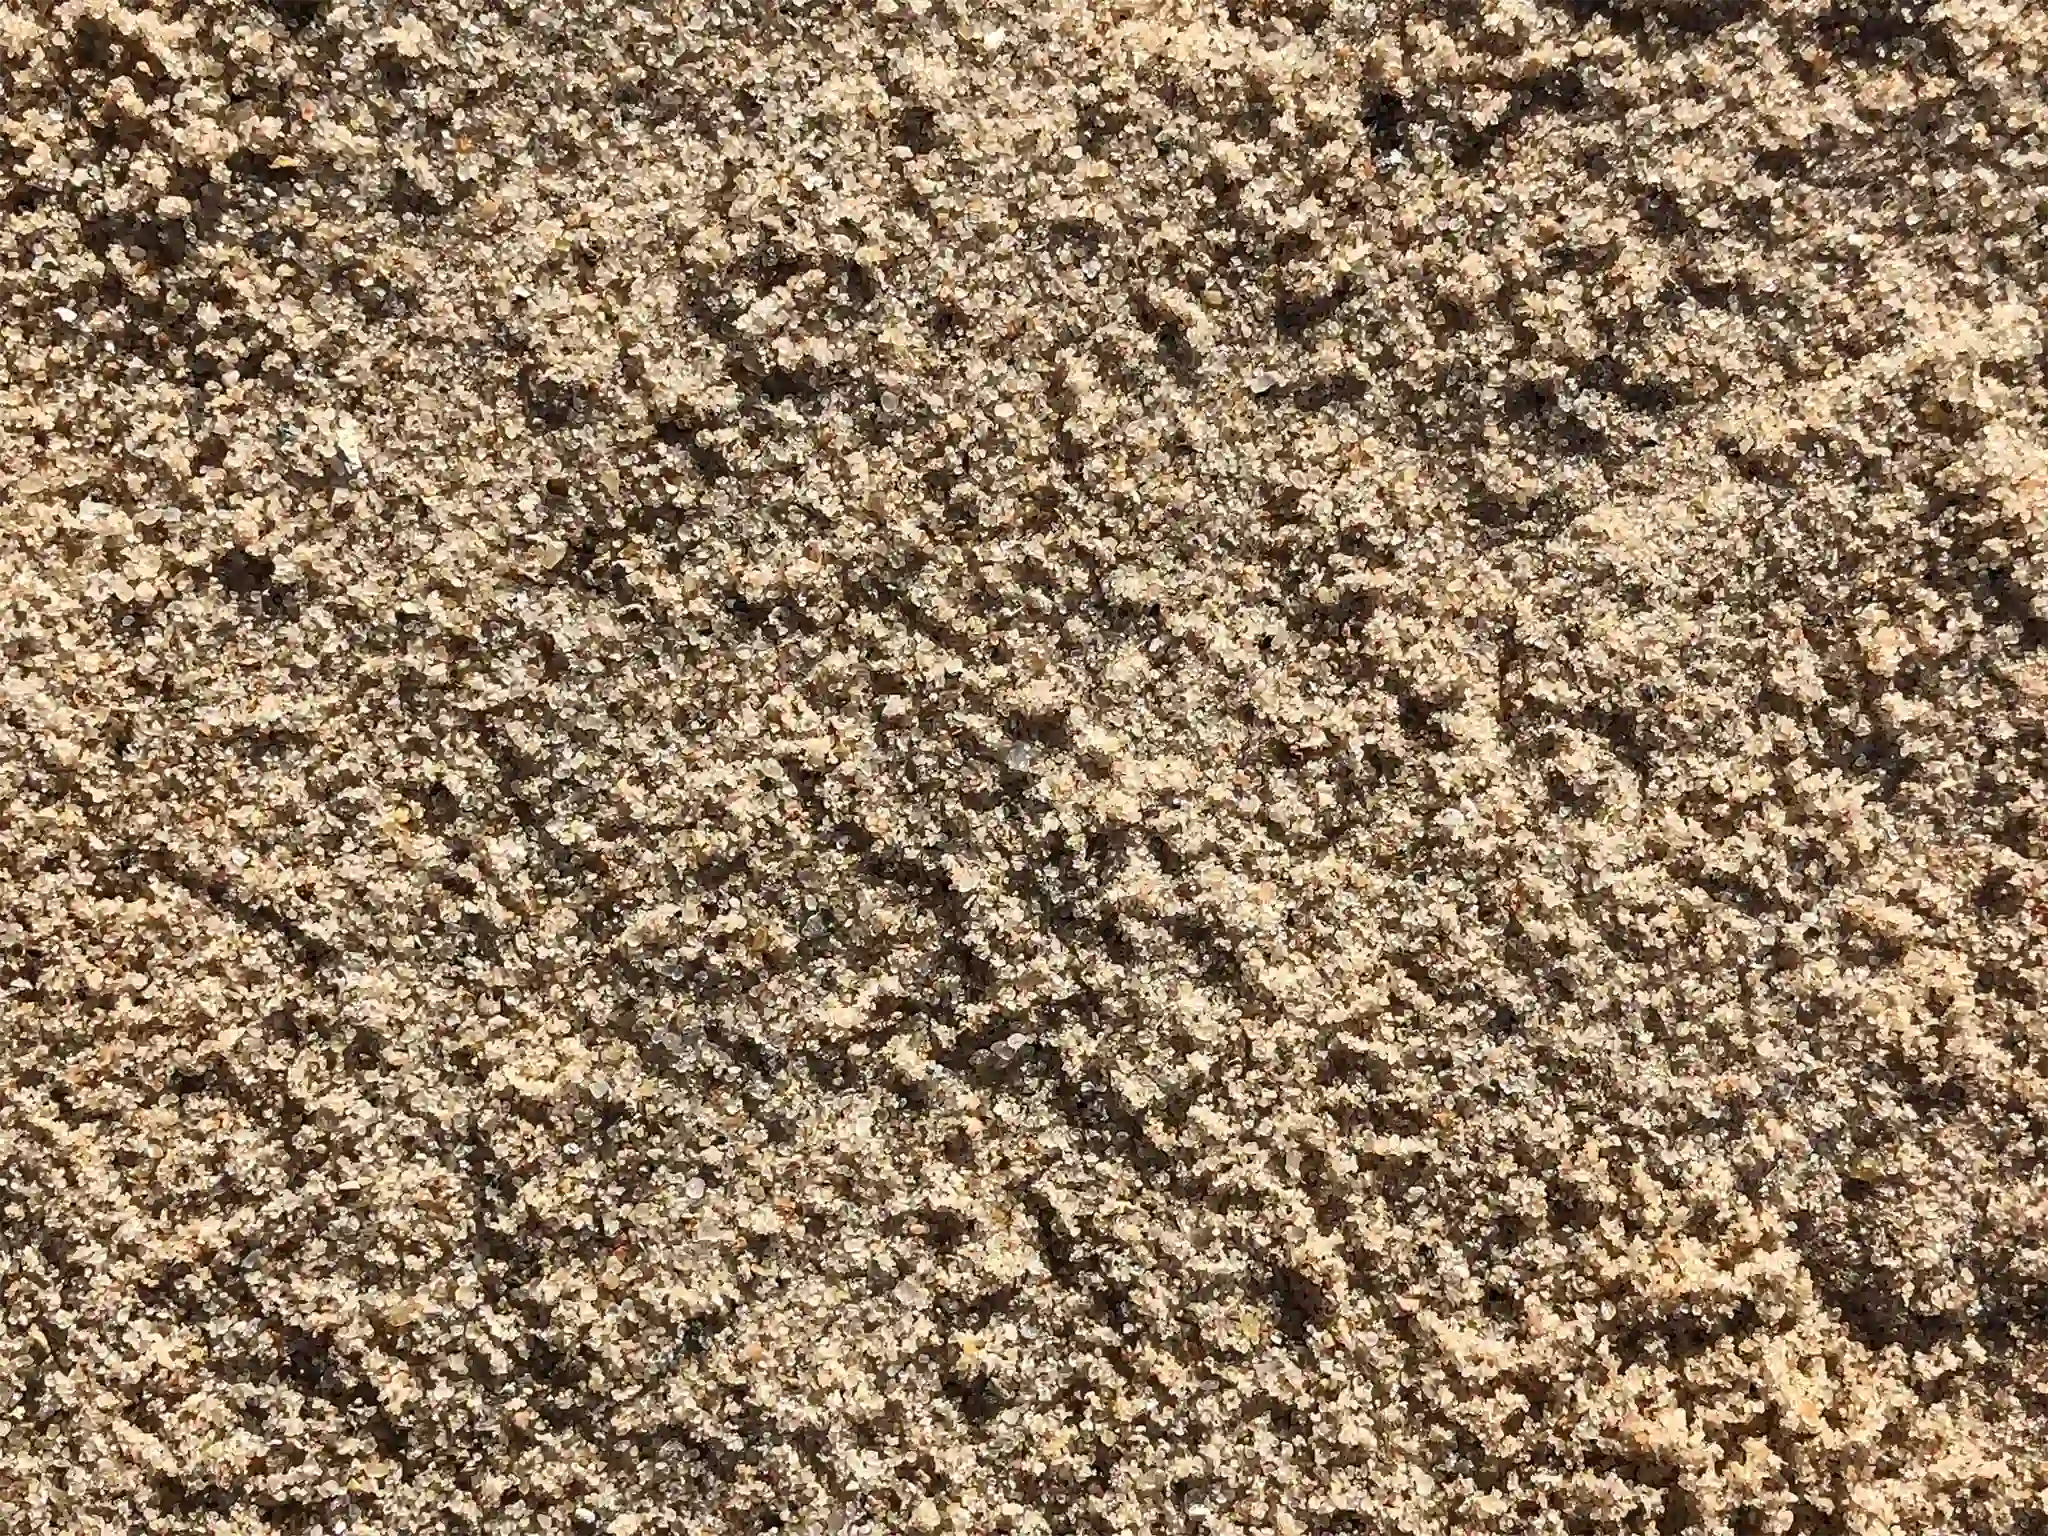 A close-up view of topdressing sand.